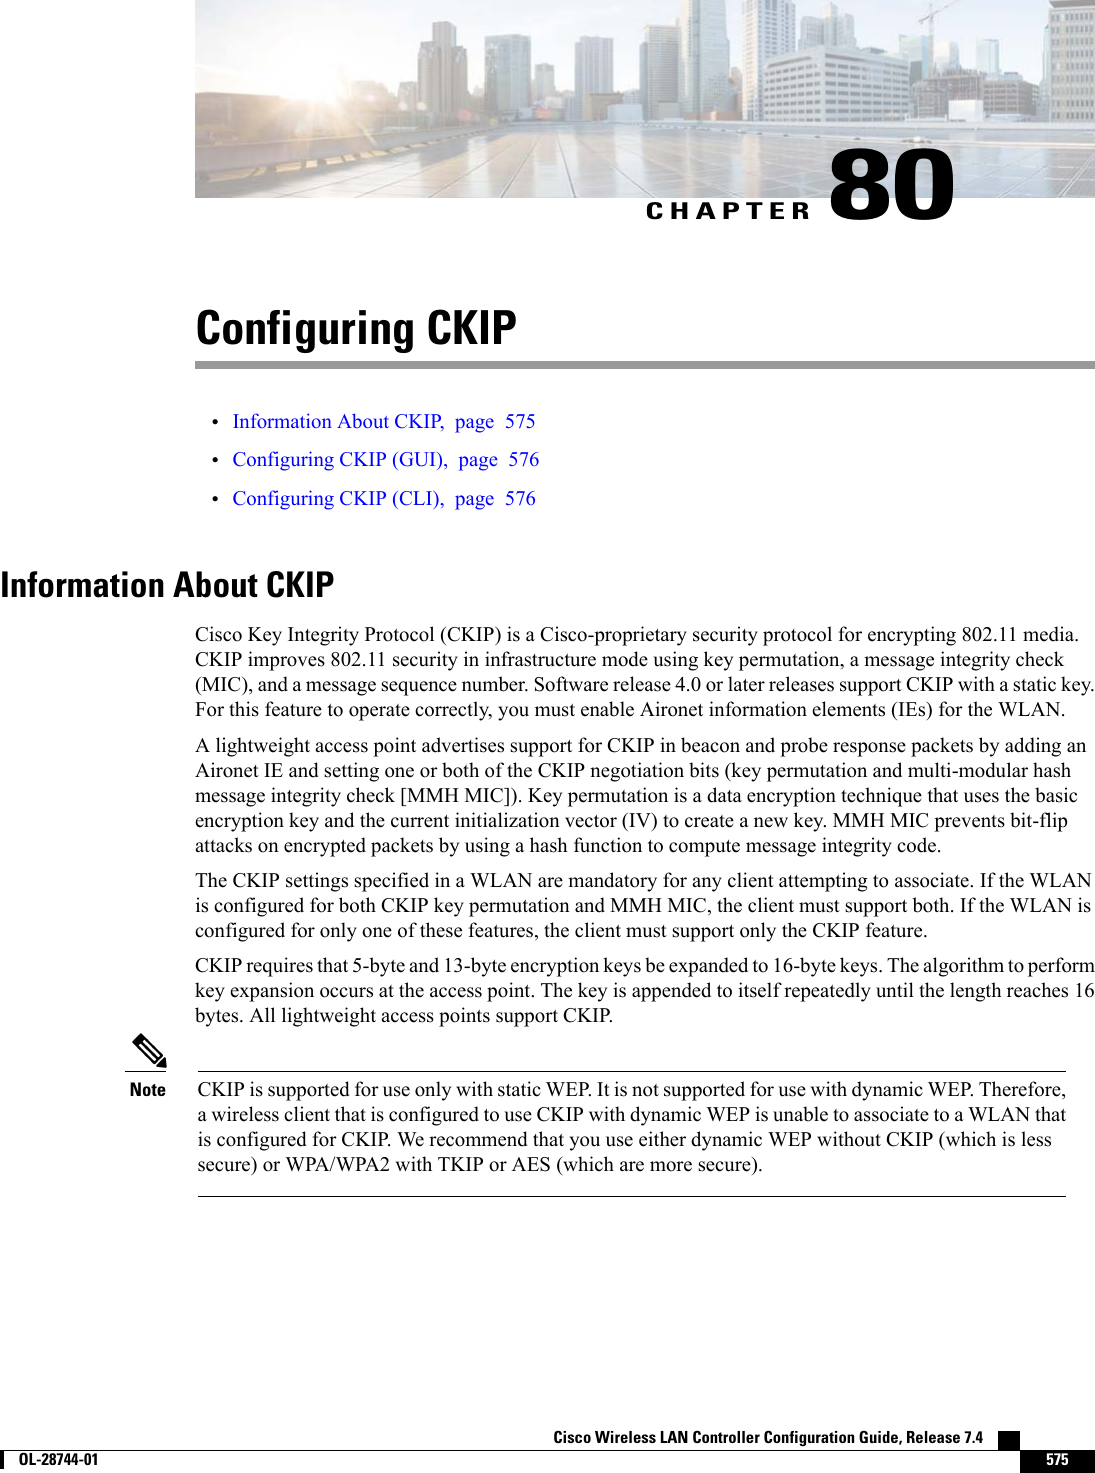 CHAPTER 80Configuring CKIP•Information About CKIP, page 575•Configuring CKIP (GUI), page 576•Configuring CKIP (CLI), page 576Information About CKIPCisco Key Integrity Protocol (CKIP) is a Cisco-proprietary security protocol for encrypting 802.11 media.CKIP improves 802.11 security in infrastructure mode using key permutation, a message integrity check(MIC), and a message sequence number. Software release 4.0 or later releases support CKIP with a static key.For this feature to operate correctly, you must enable Aironet information elements (IEs) for the WLAN.A lightweight access point advertises support for CKIP in beacon and probe response packets by adding anAironet IE and setting one or both of the CKIP negotiation bits (key permutation and multi-modular hashmessage integrity check [MMH MIC]). Key permutation is a data encryption technique that uses the basicencryption key and the current initialization vector (IV) to create a new key. MMH MIC prevents bit-flipattacks on encrypted packets by using a hash function to compute message integrity code.The CKIP settings specified in a WLAN are mandatory for any client attempting to associate. If the WLANis configured for both CKIP key permutation and MMH MIC, the client must support both. If the WLAN isconfigured for only one of these features, the client must support only the CKIP feature.CKIP requires that 5-byte and 13-byte encryption keys be expanded to 16-byte keys. The algorithm to performkey expansion occurs at the access point. The key is appended to itself repeatedly until the length reaches 16bytes. All lightweight access points support CKIP.CKIP is supported for use only with static WEP. It is not supported for use with dynamic WEP. Therefore,a wireless client that is configured to use CKIP with dynamic WEP is unable to associate to a WLAN thatis configured for CKIP. We recommend that you use either dynamic WEP without CKIP (which is lesssecure) or WPA/WPA2 with TKIP or AES (which are more secure).NoteCisco Wireless LAN Controller Configuration Guide, Release 7.4        OL-28744-01 575